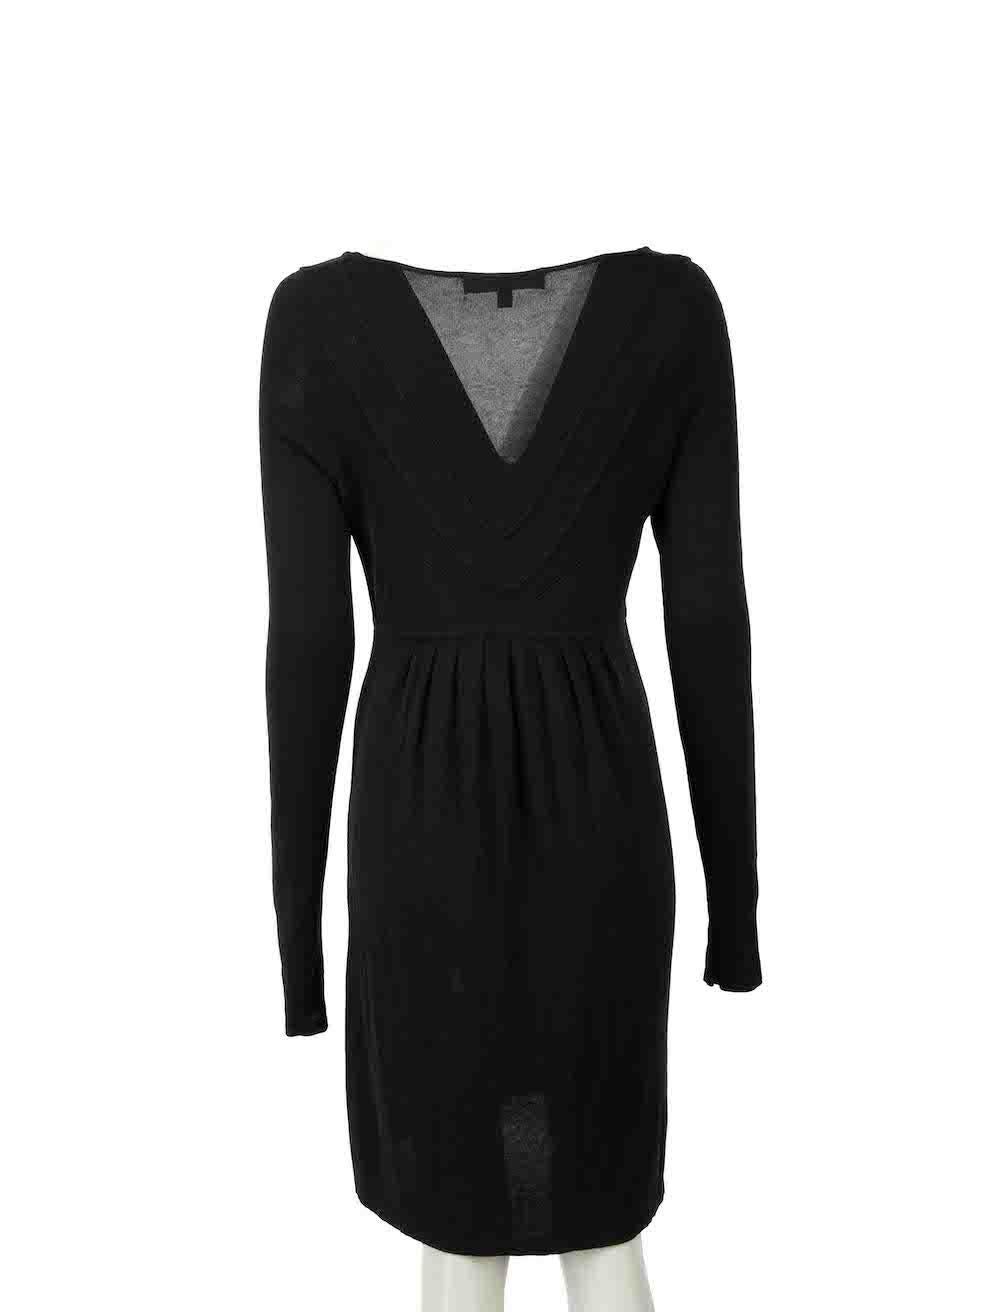 Jasmine Di Milo Vintage Black Plunge Neck Dress Size S In Good Condition For Sale In London, GB